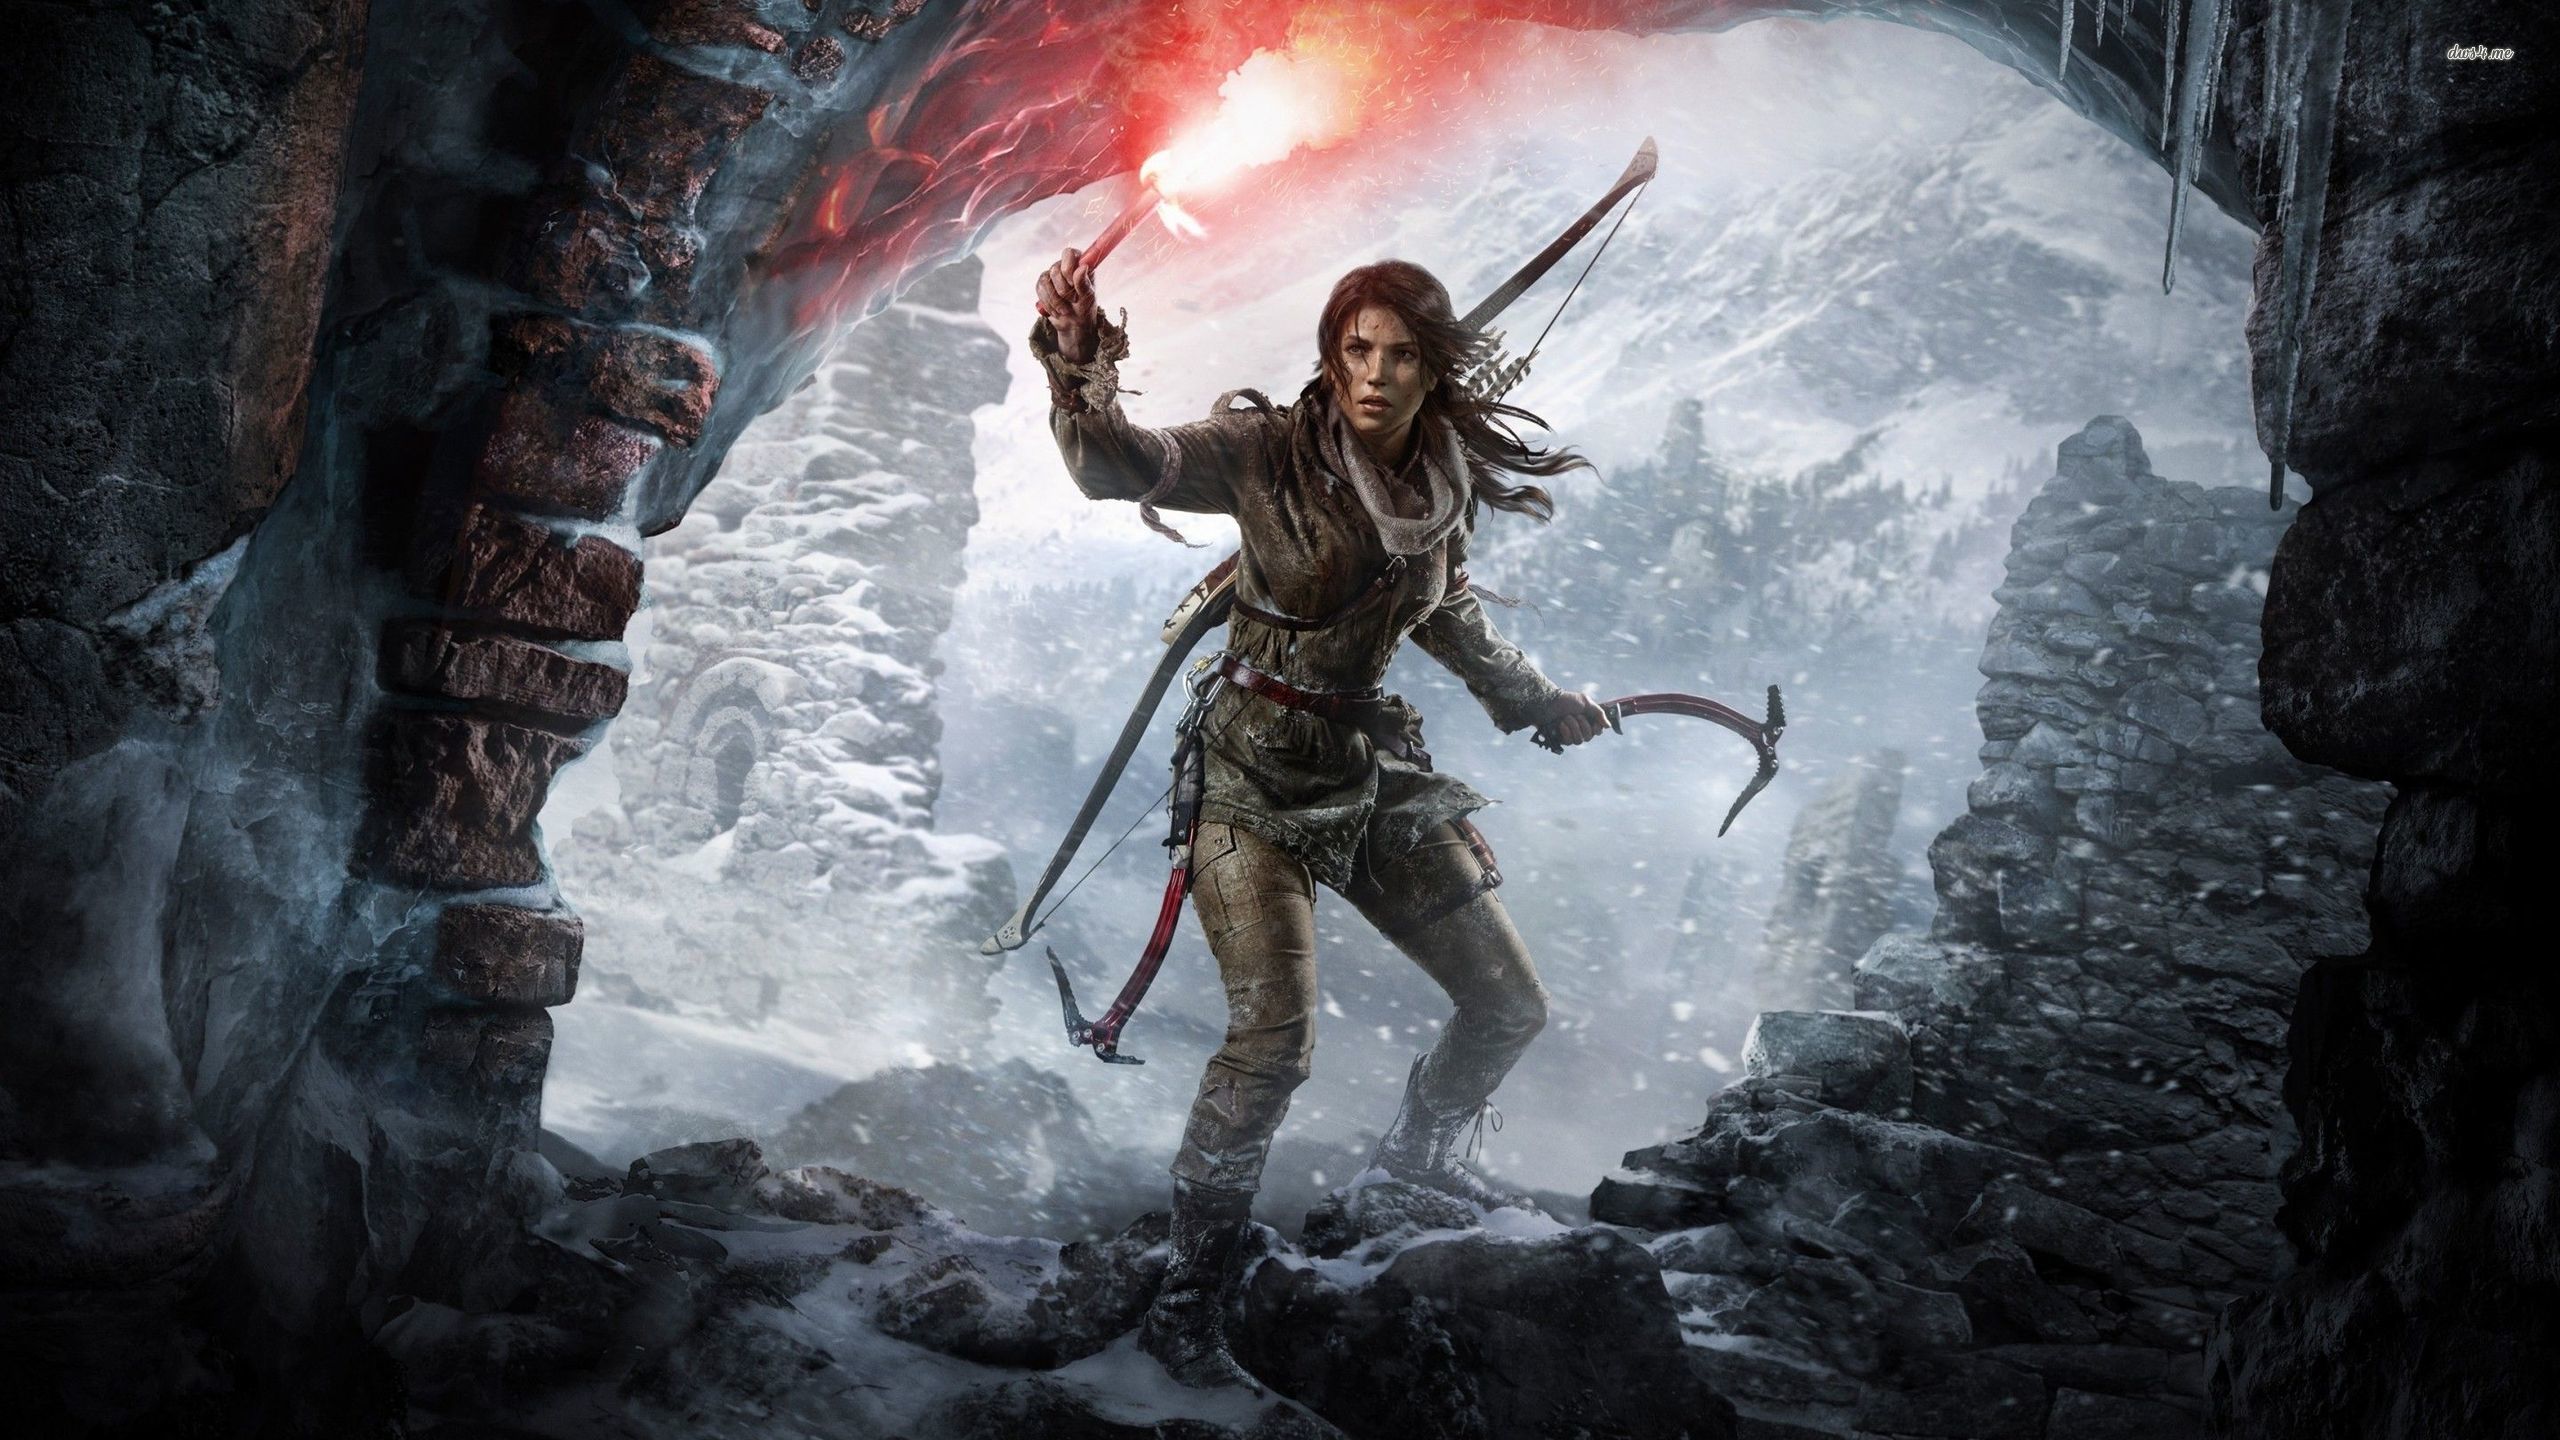 Rise of the Tomb Raider wallpaper - Game wallpapers - #42536